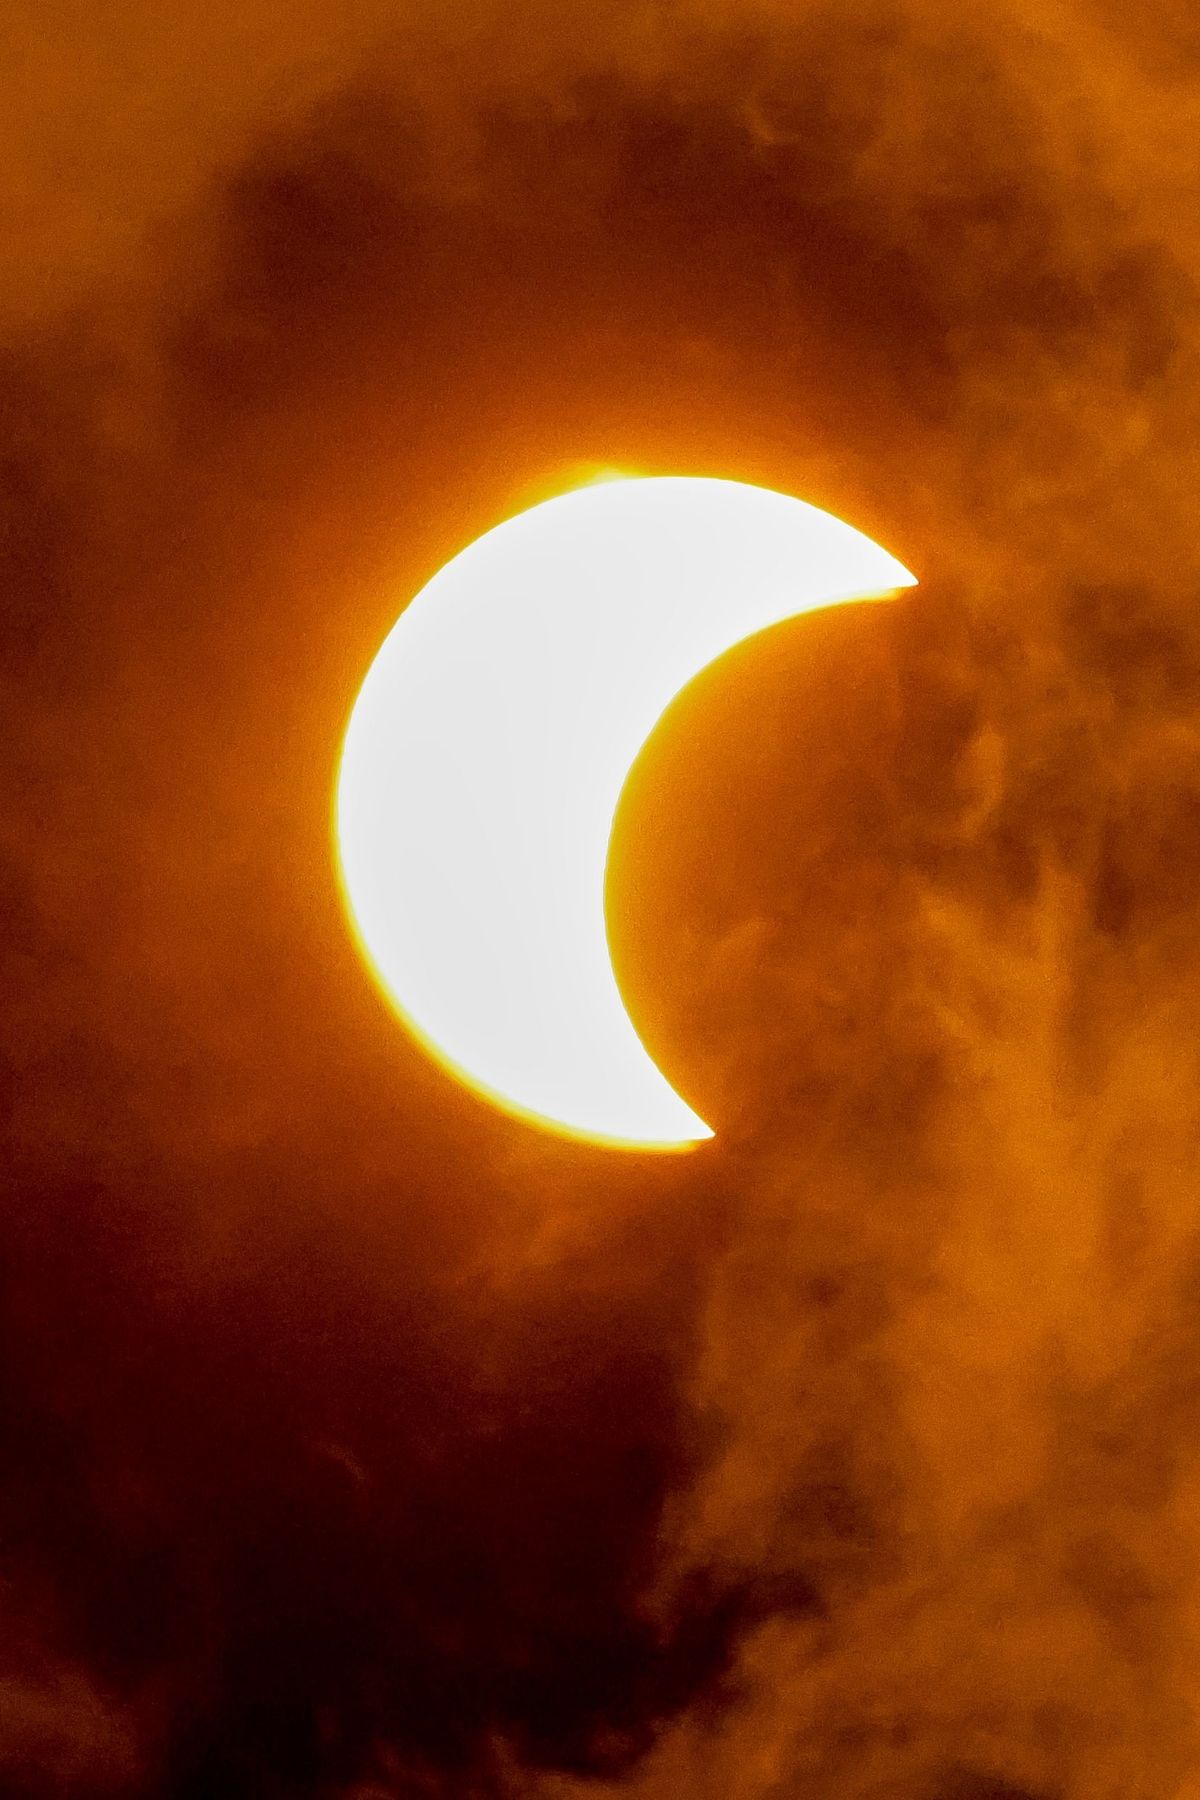 The moon partially covers the sun during a solar eclipse. - Eclipse